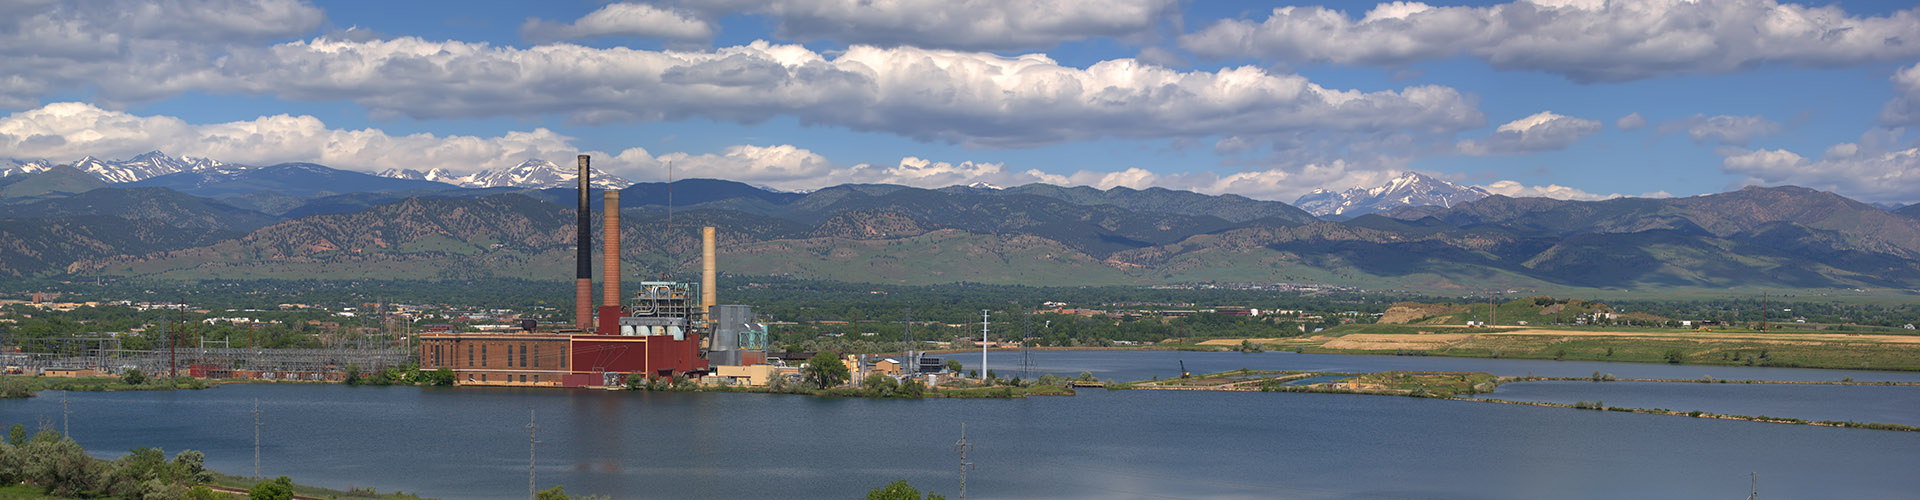 panorama of valmont power station